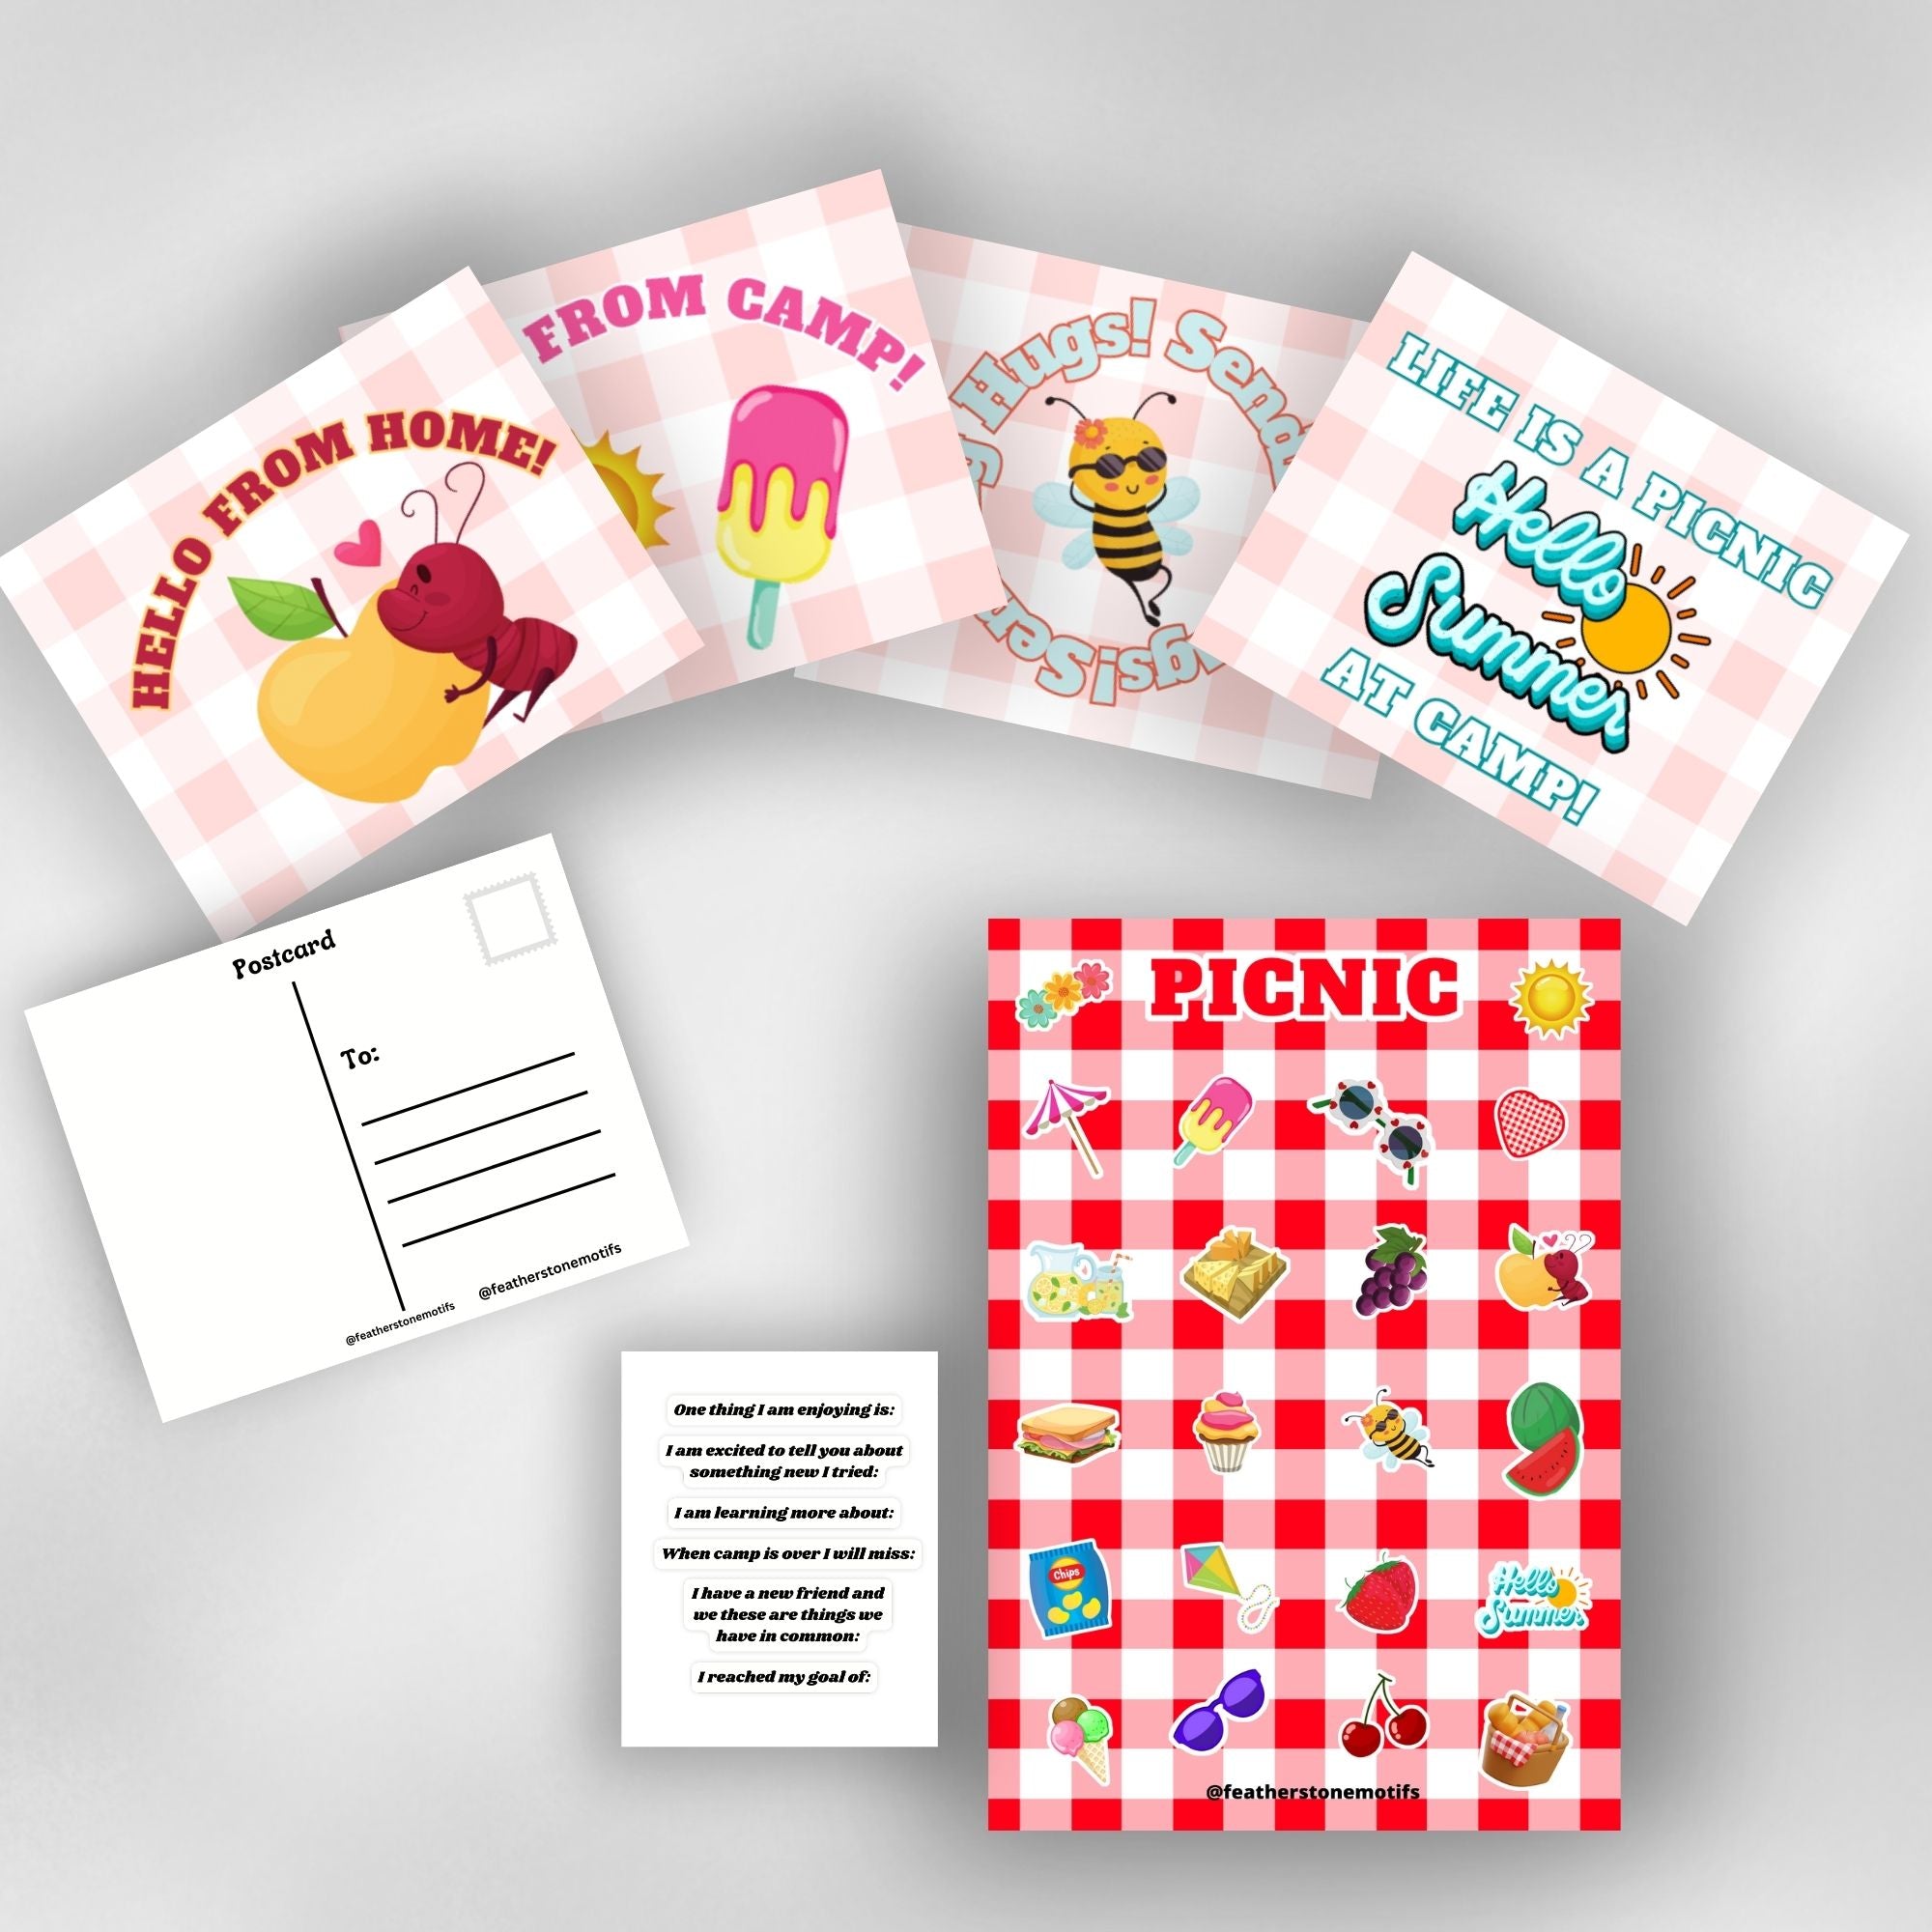 This image shows the full Picnic themed Camp Postcard Kit.